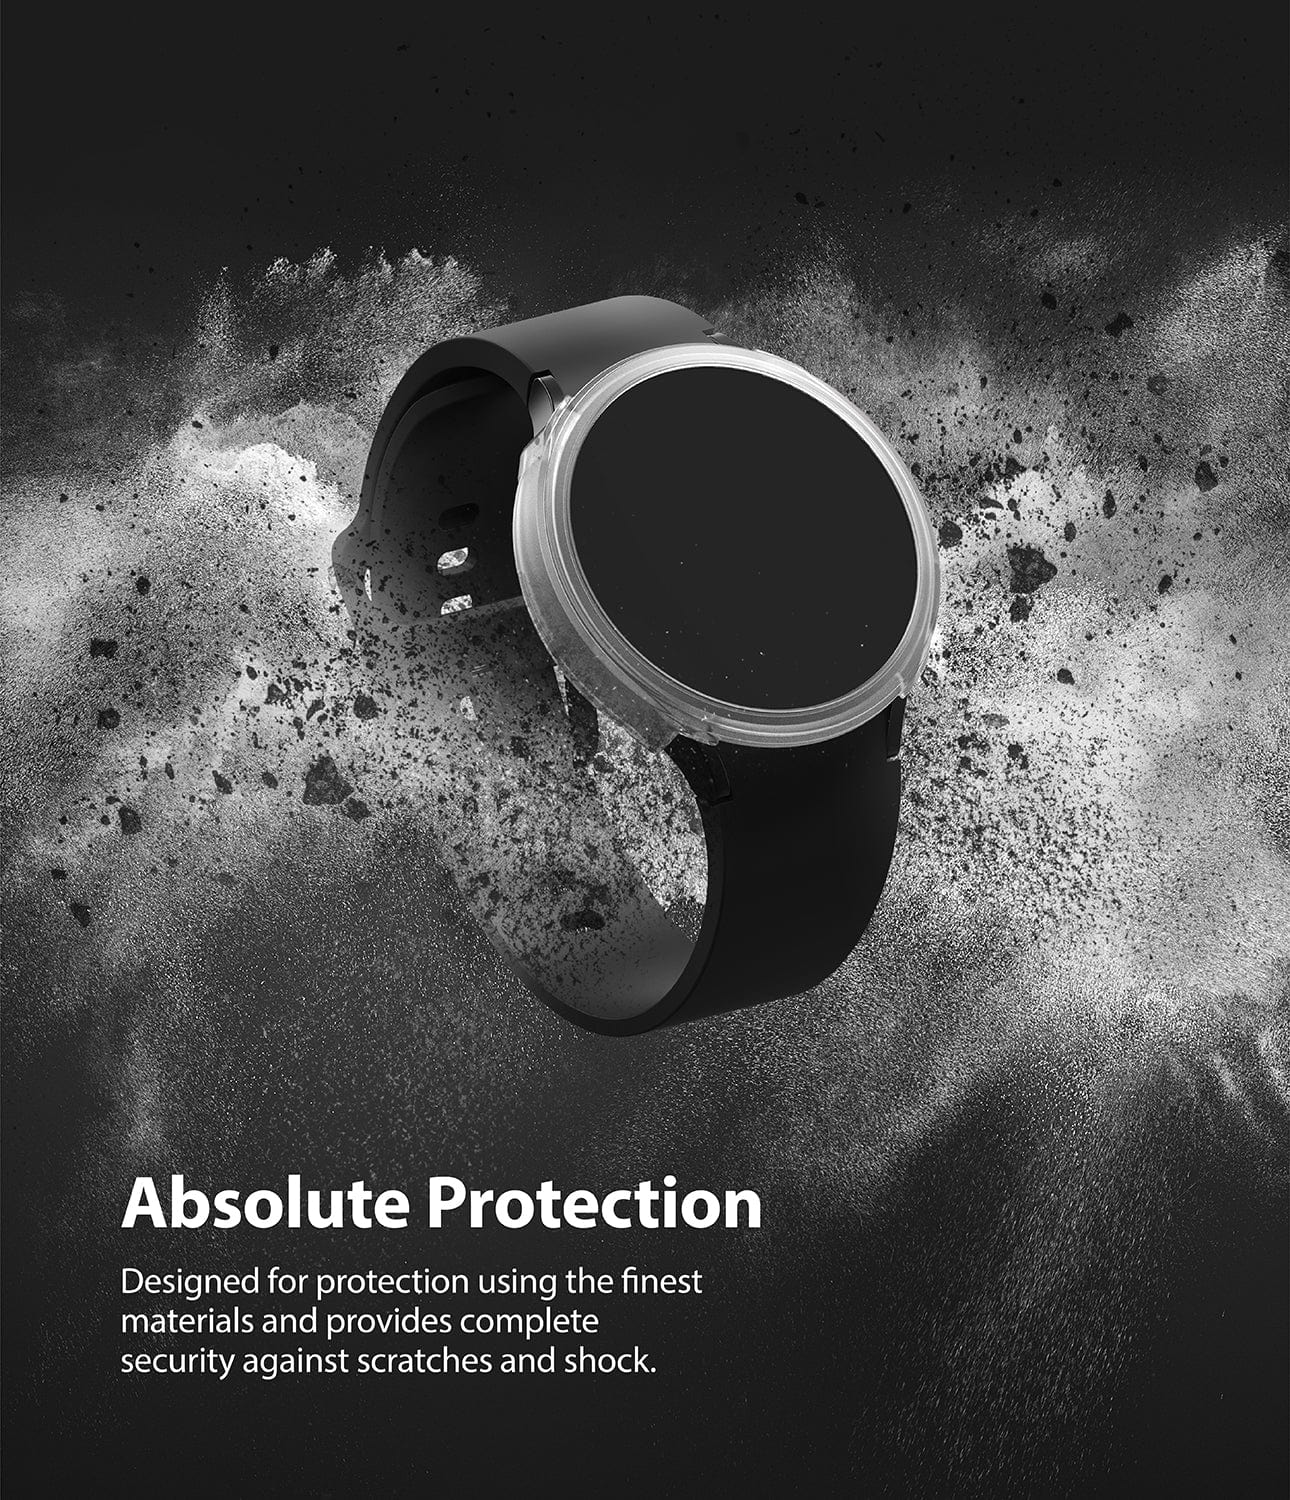 Complete protection for your device, ensuring its safety and security.